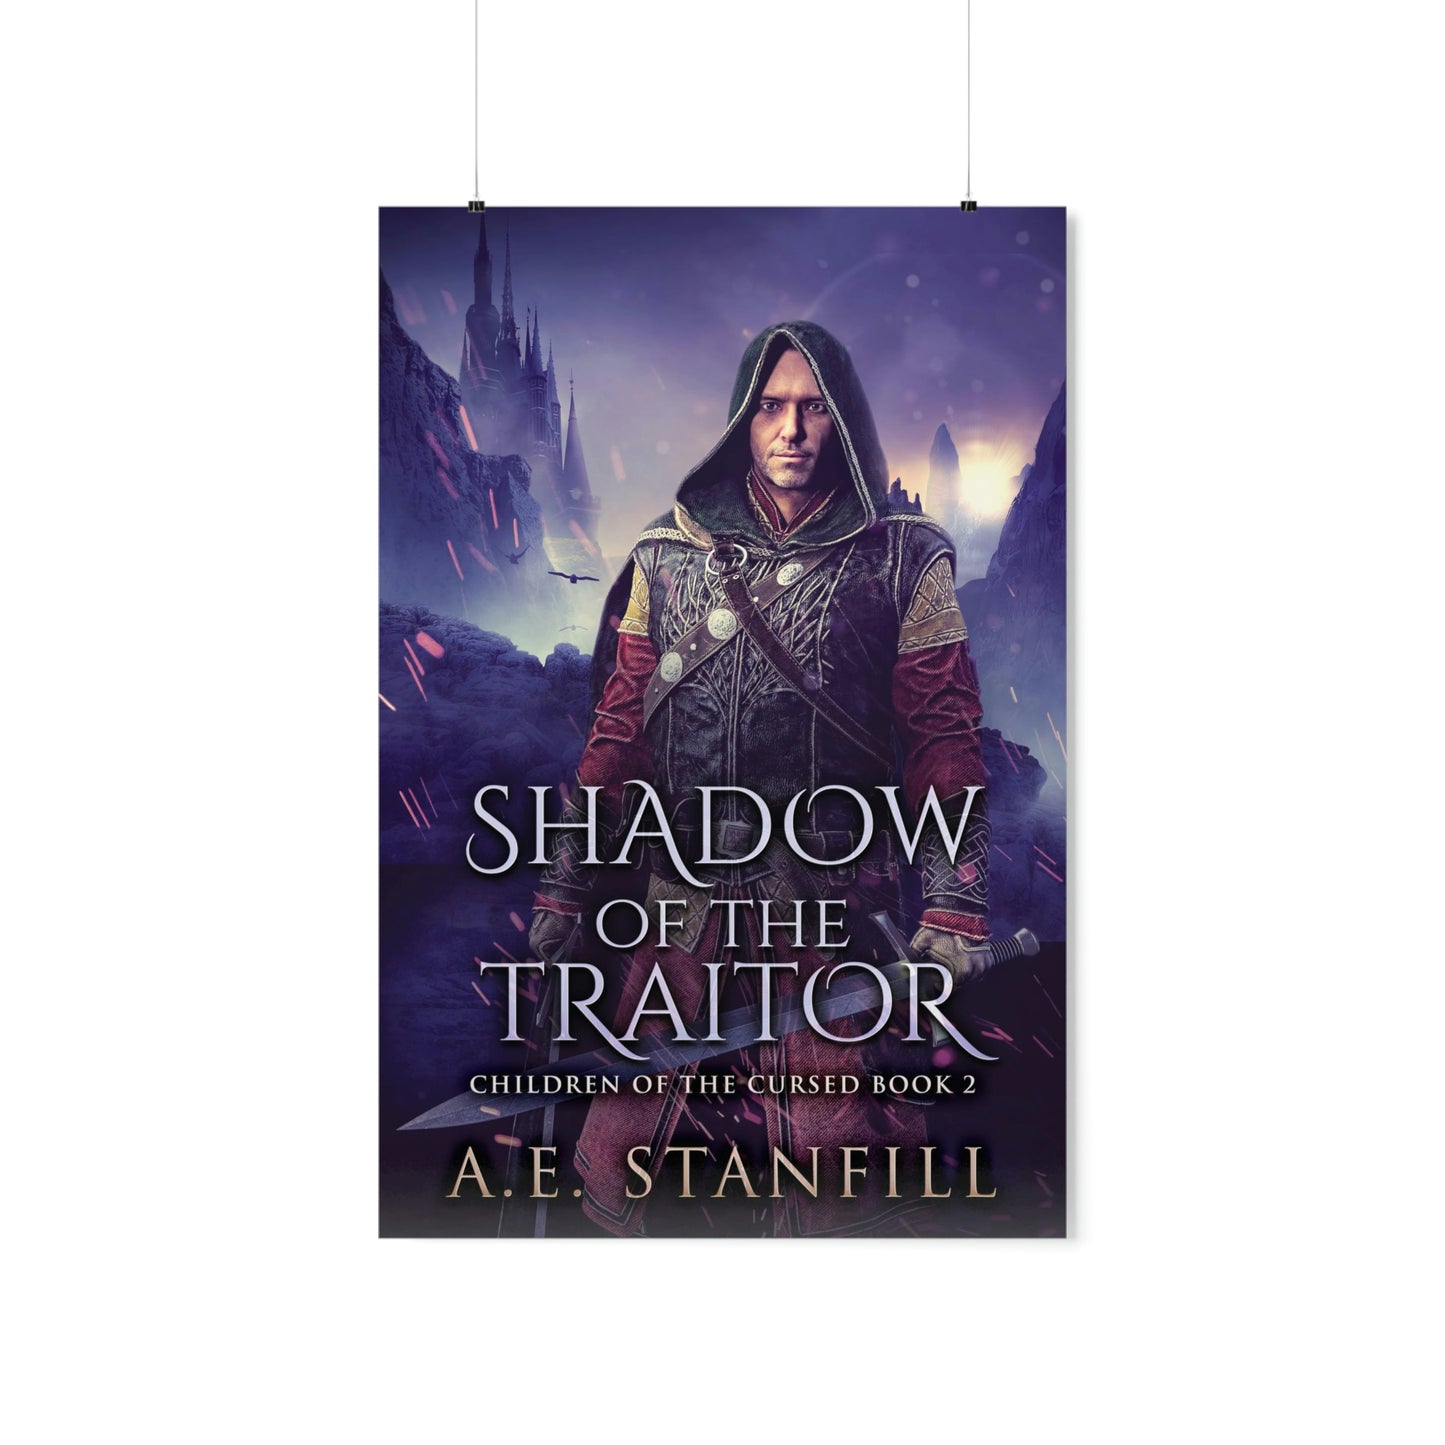 Shadow Of The Traitor - Matte Poster